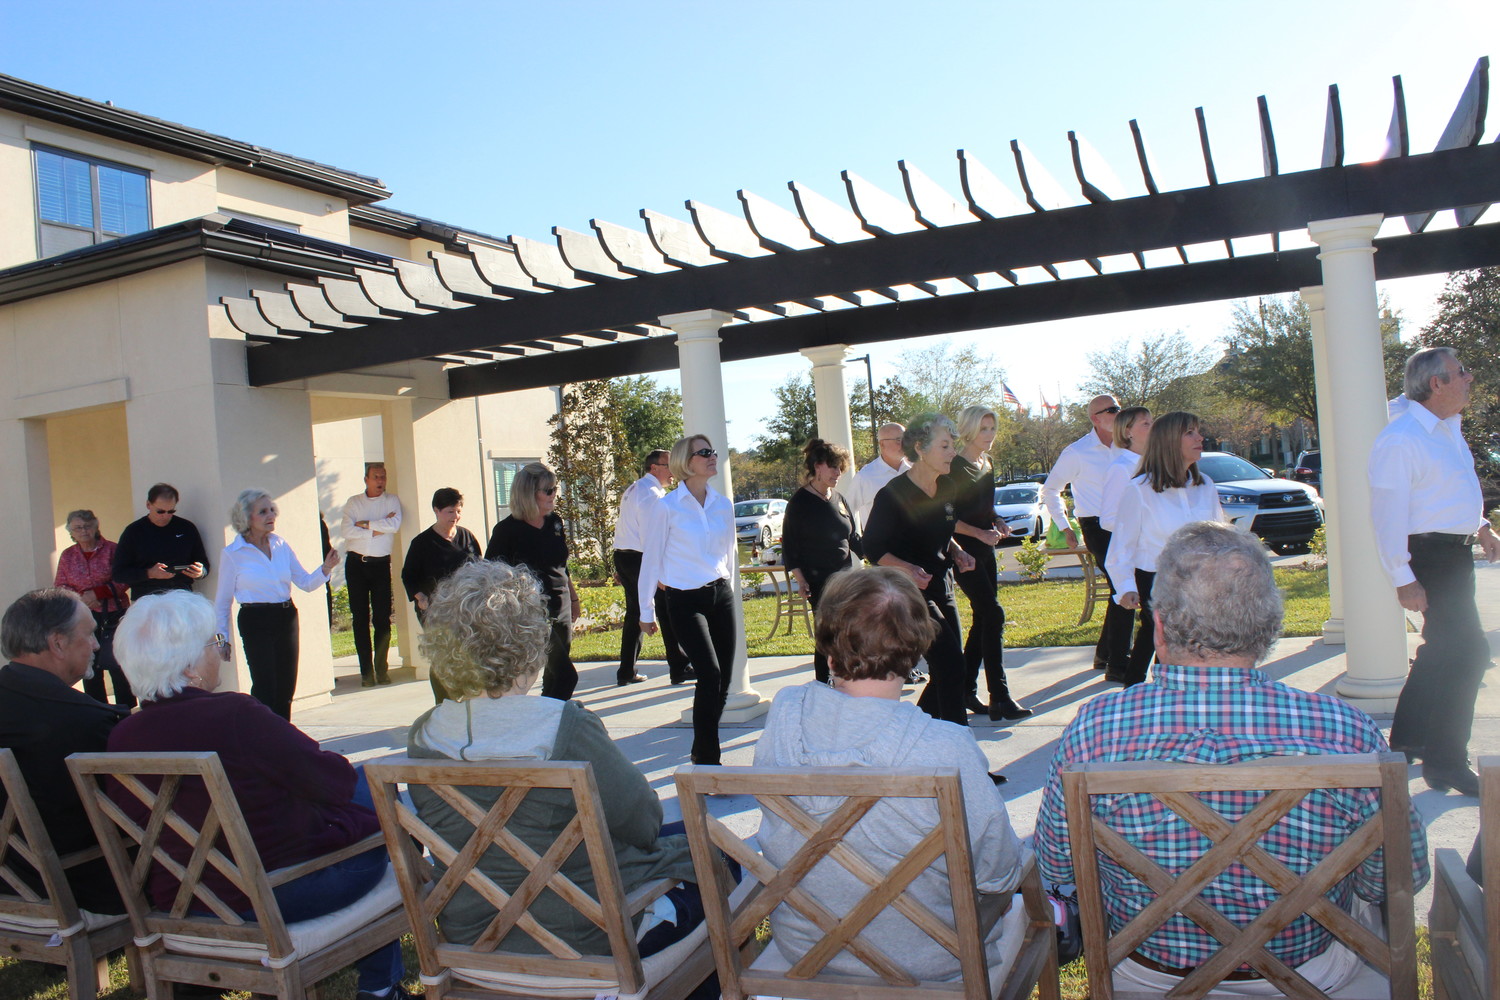 Spark, Del Webb's dance team, performs at the Starling’s grand opening event.